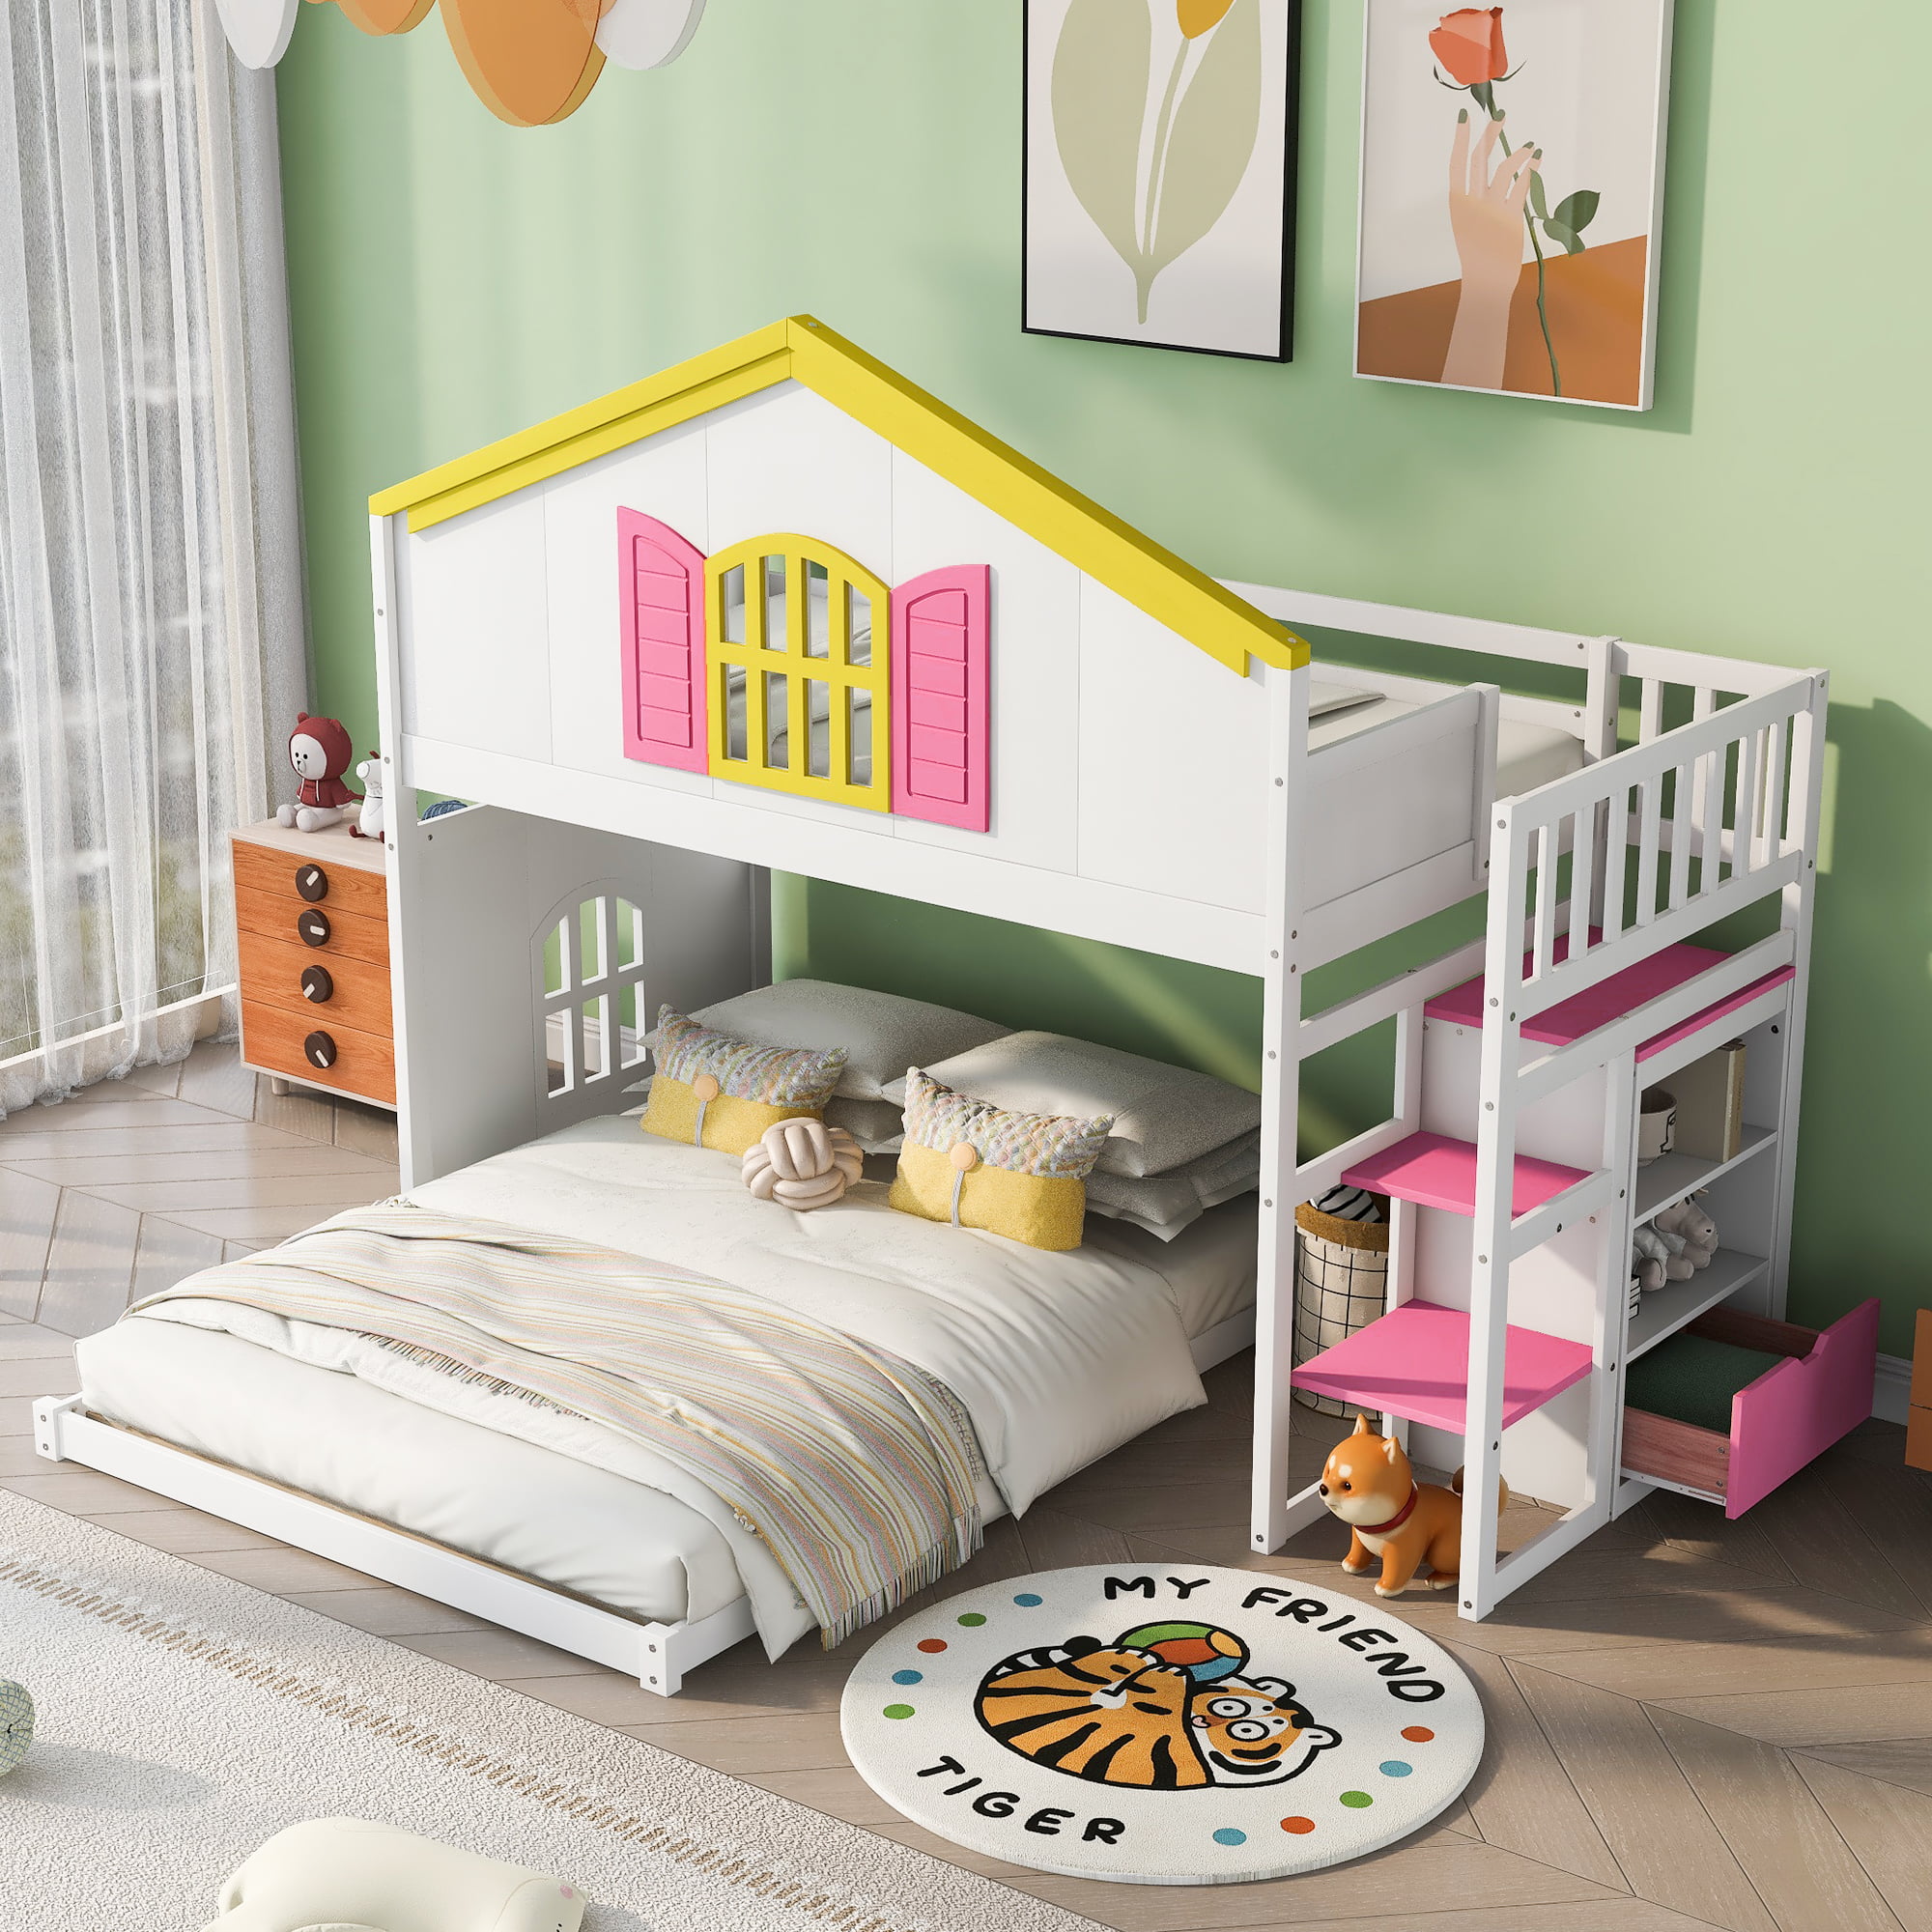 House-Shaped Twin Over Full Bunk Bed With Pink Staircase, Drawer, and Windows